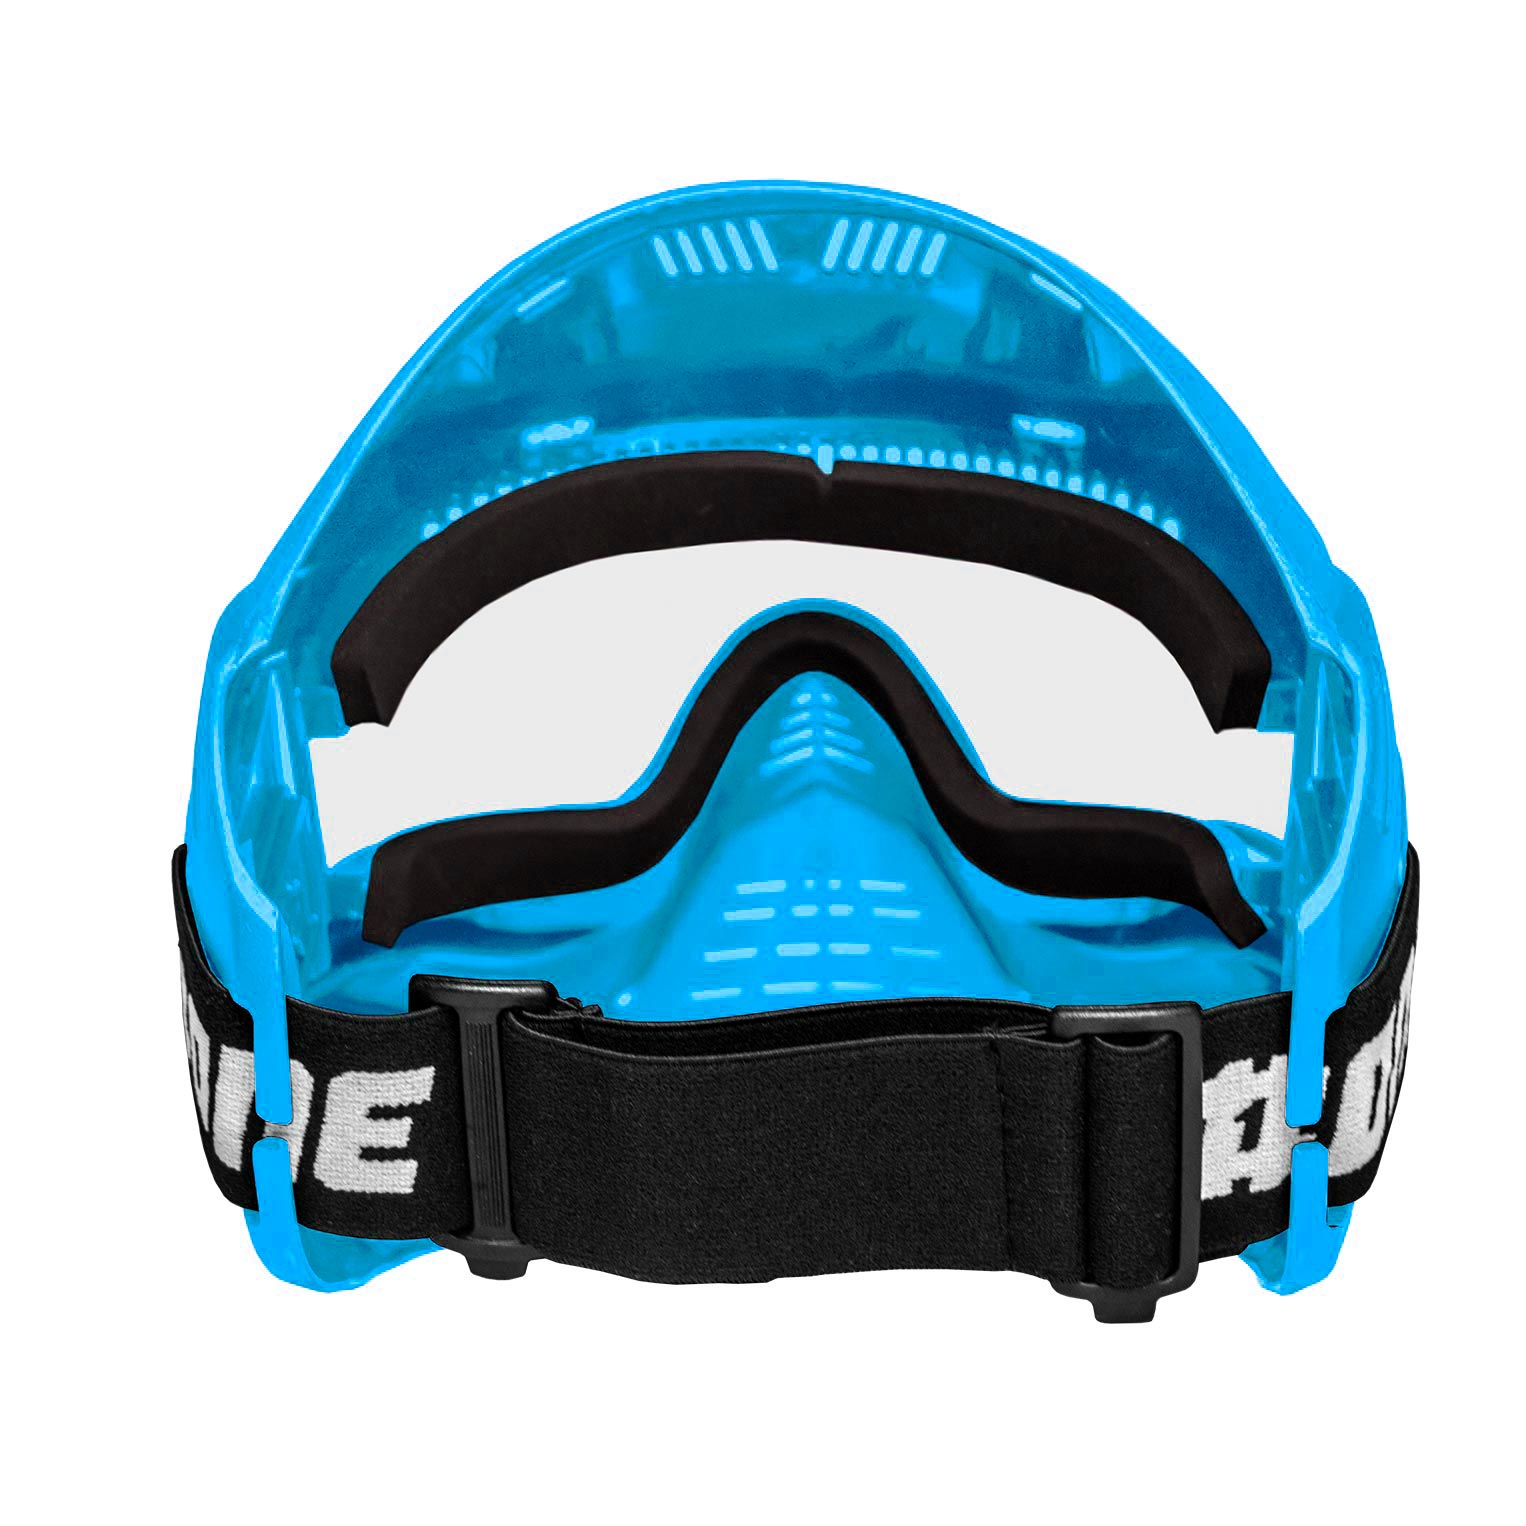 FIELDpb - ONE Goggle (Thermal Lens) - Rubber Foam - Blue